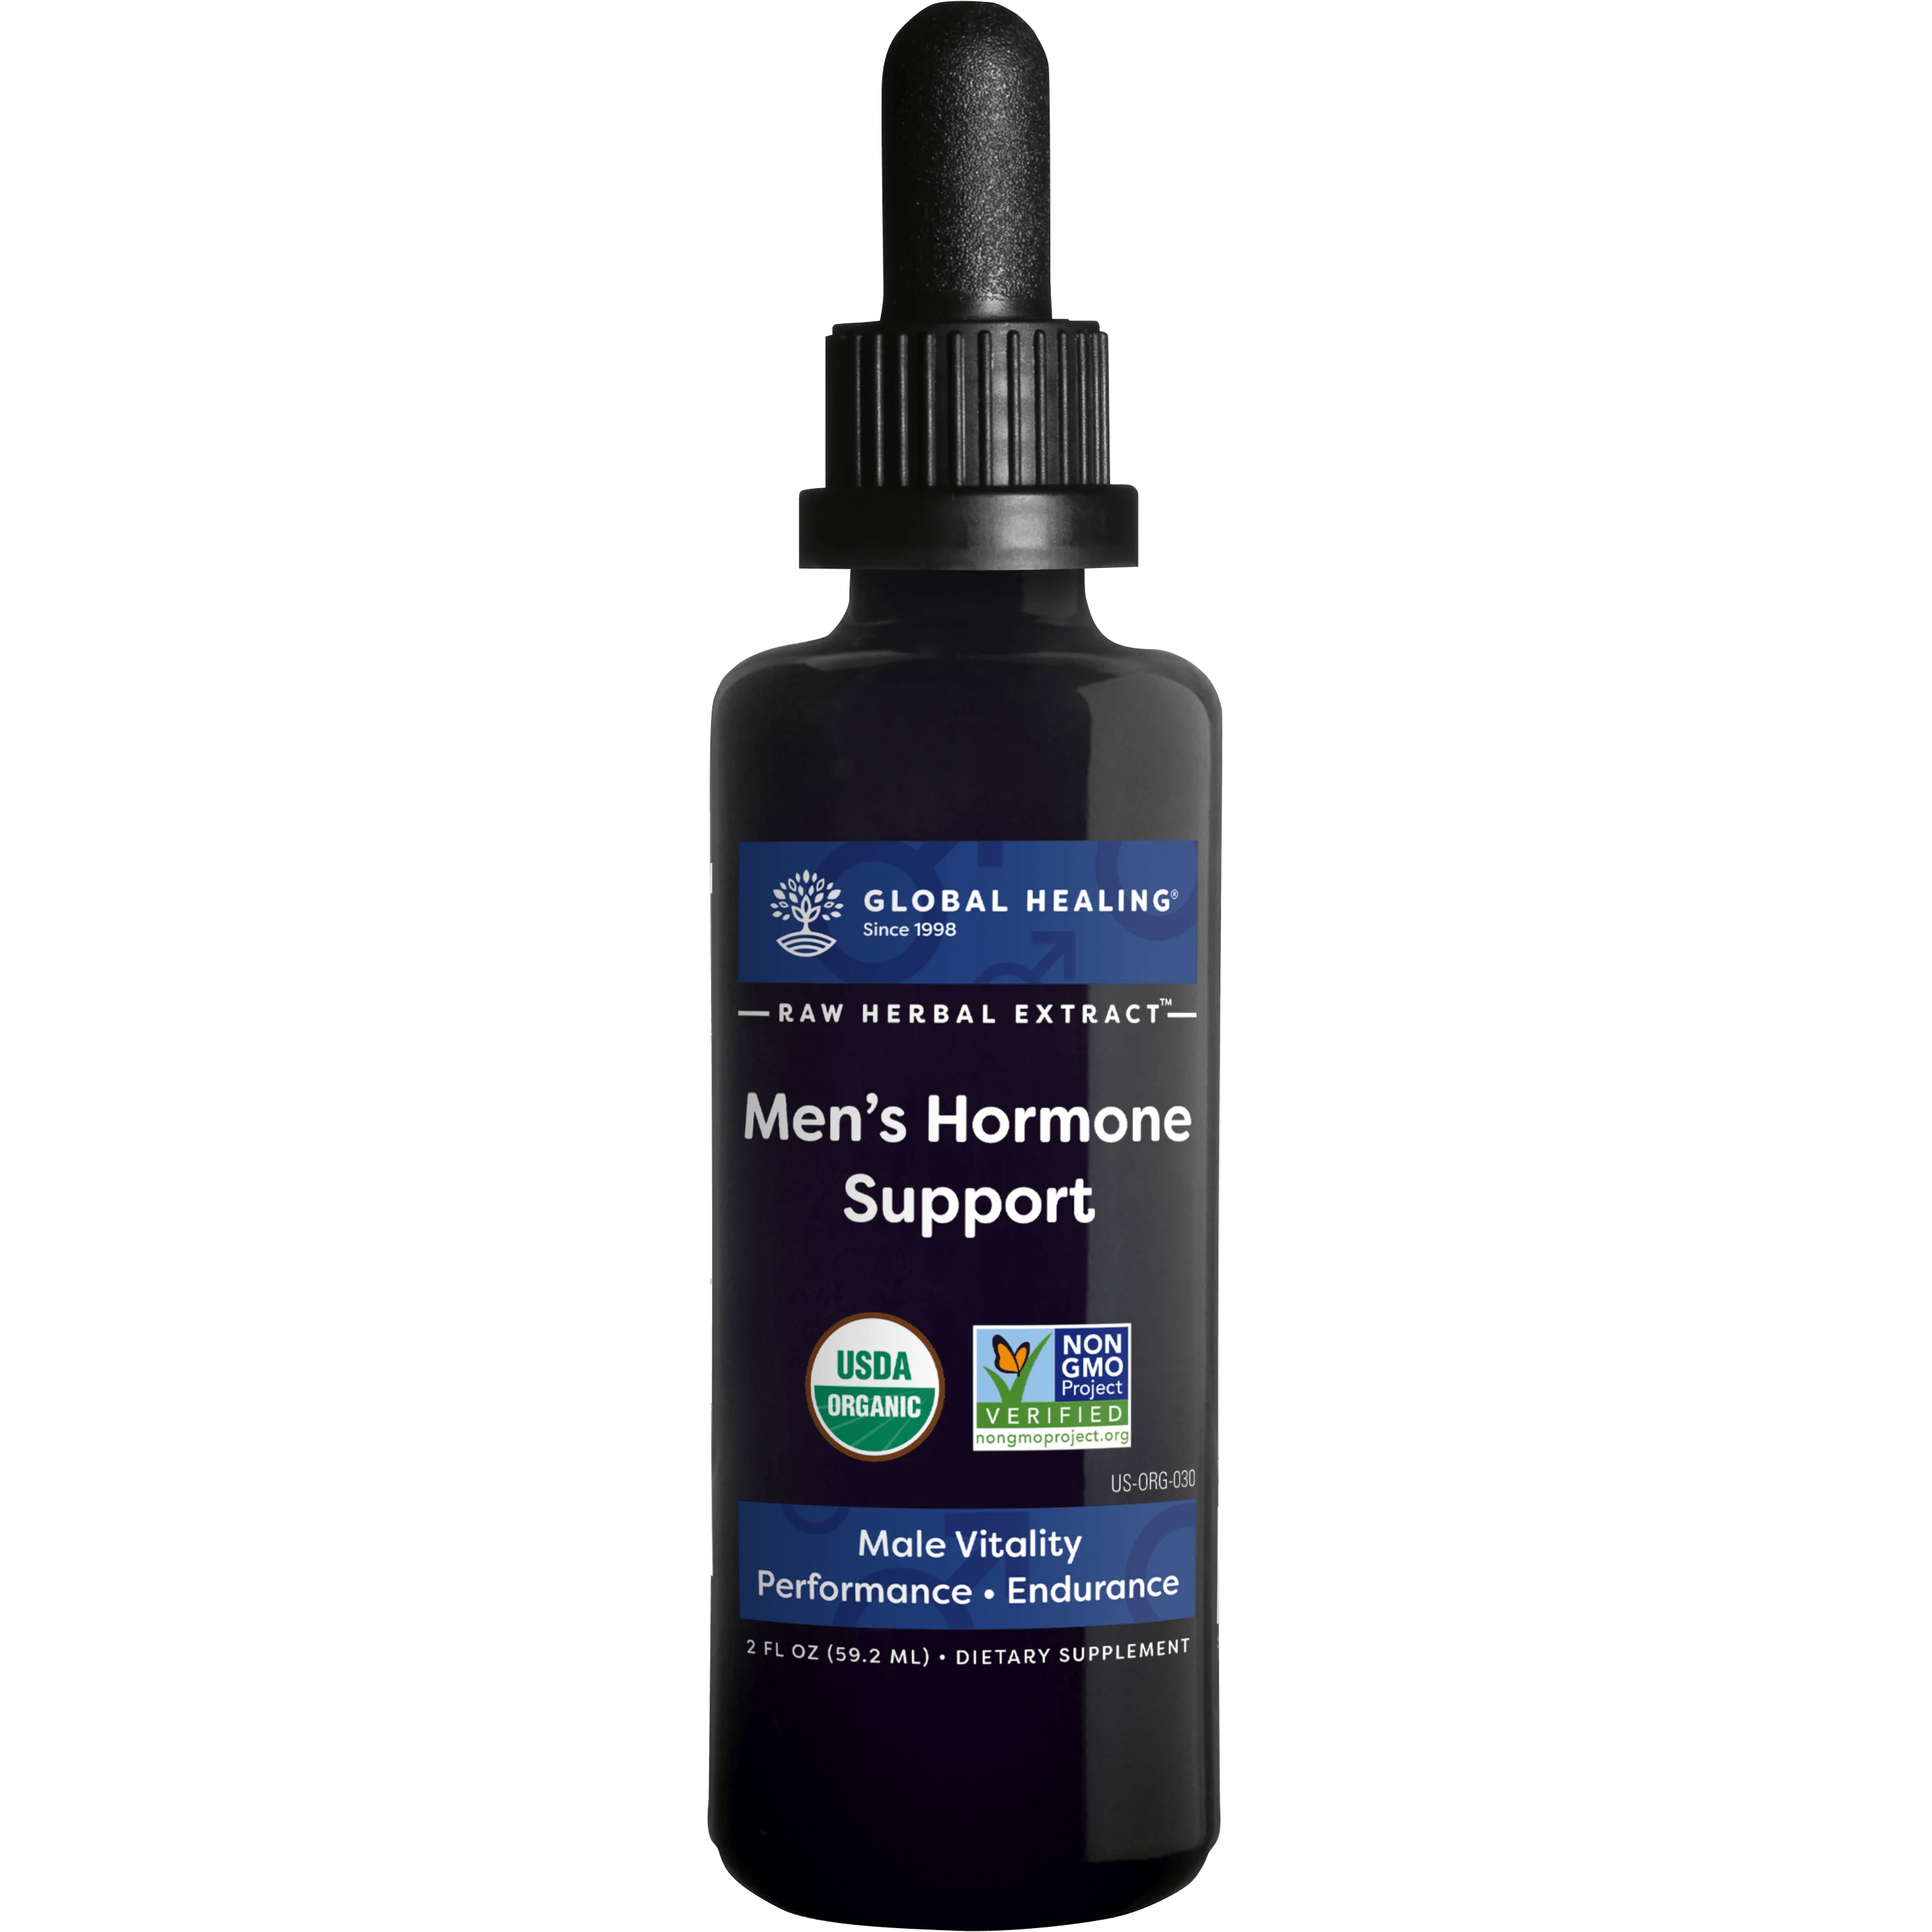 Global Healing's Men's Hormone Support (formerly Androtrex)Bottle.